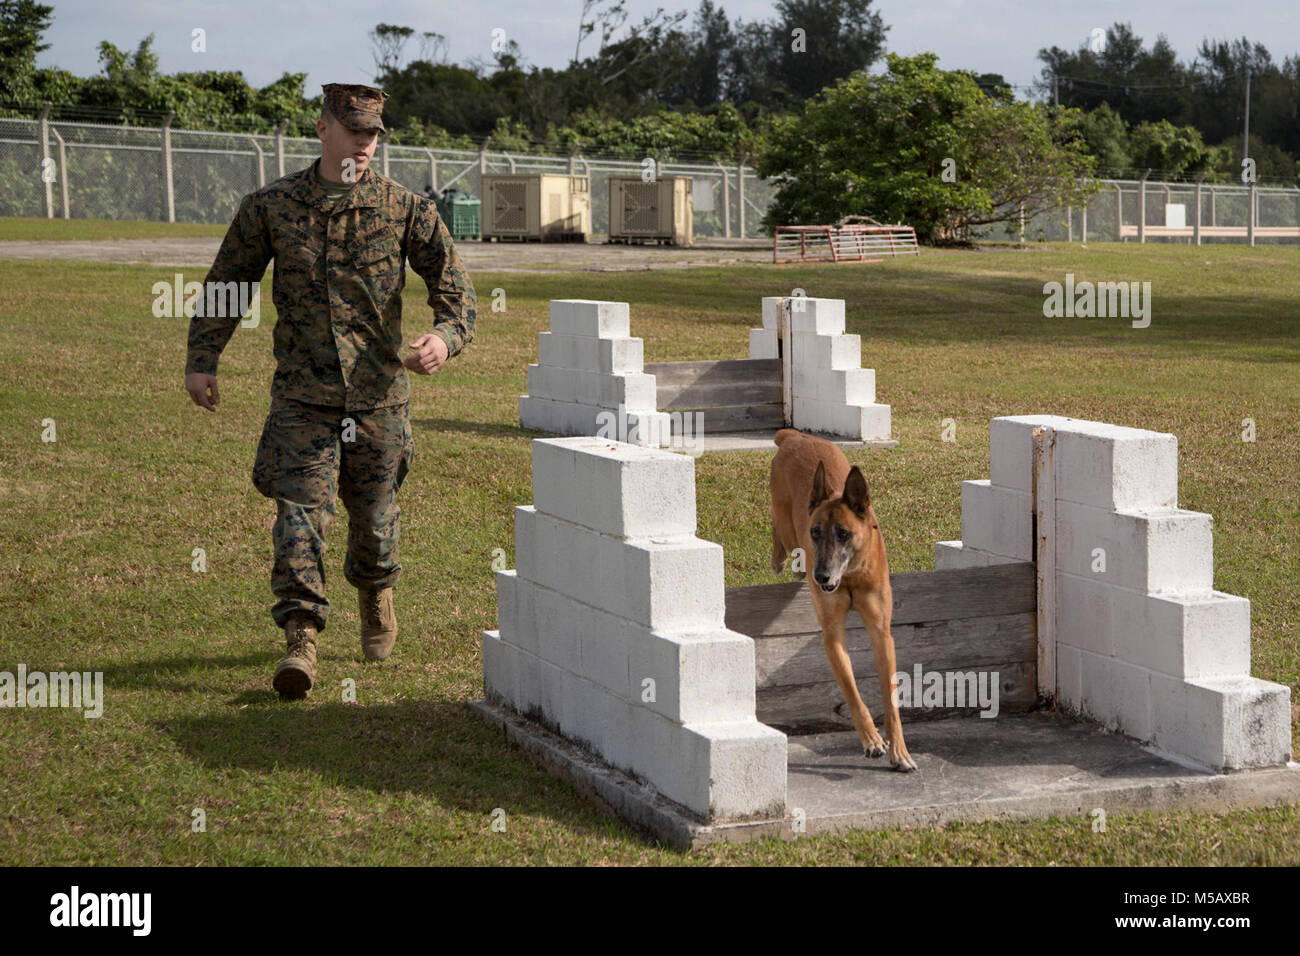 KADENA AIR BASE, OKINAWA, Japan – Lance Cpl. Matthew Yaw and Military Working Dog Bbulter run the obedience course Feb. 13 at the Marine Corps Installations Pacific K-9 kennels on Kadena Air Base, Okinawa, Japan. The obedience course reinforces instant, willing obedience. K-9 units are a visual and psychological deterrent which helps keep military installations narcotics and explosive free. Yaw is a military police officer and a dog handler with Headquarters and Support Battalion, MCIPAC- Marine Corps Base Camp Butler, Japan. Bbutler’s unique name came from Lackland Air Force Base’s signature  Stock Photo